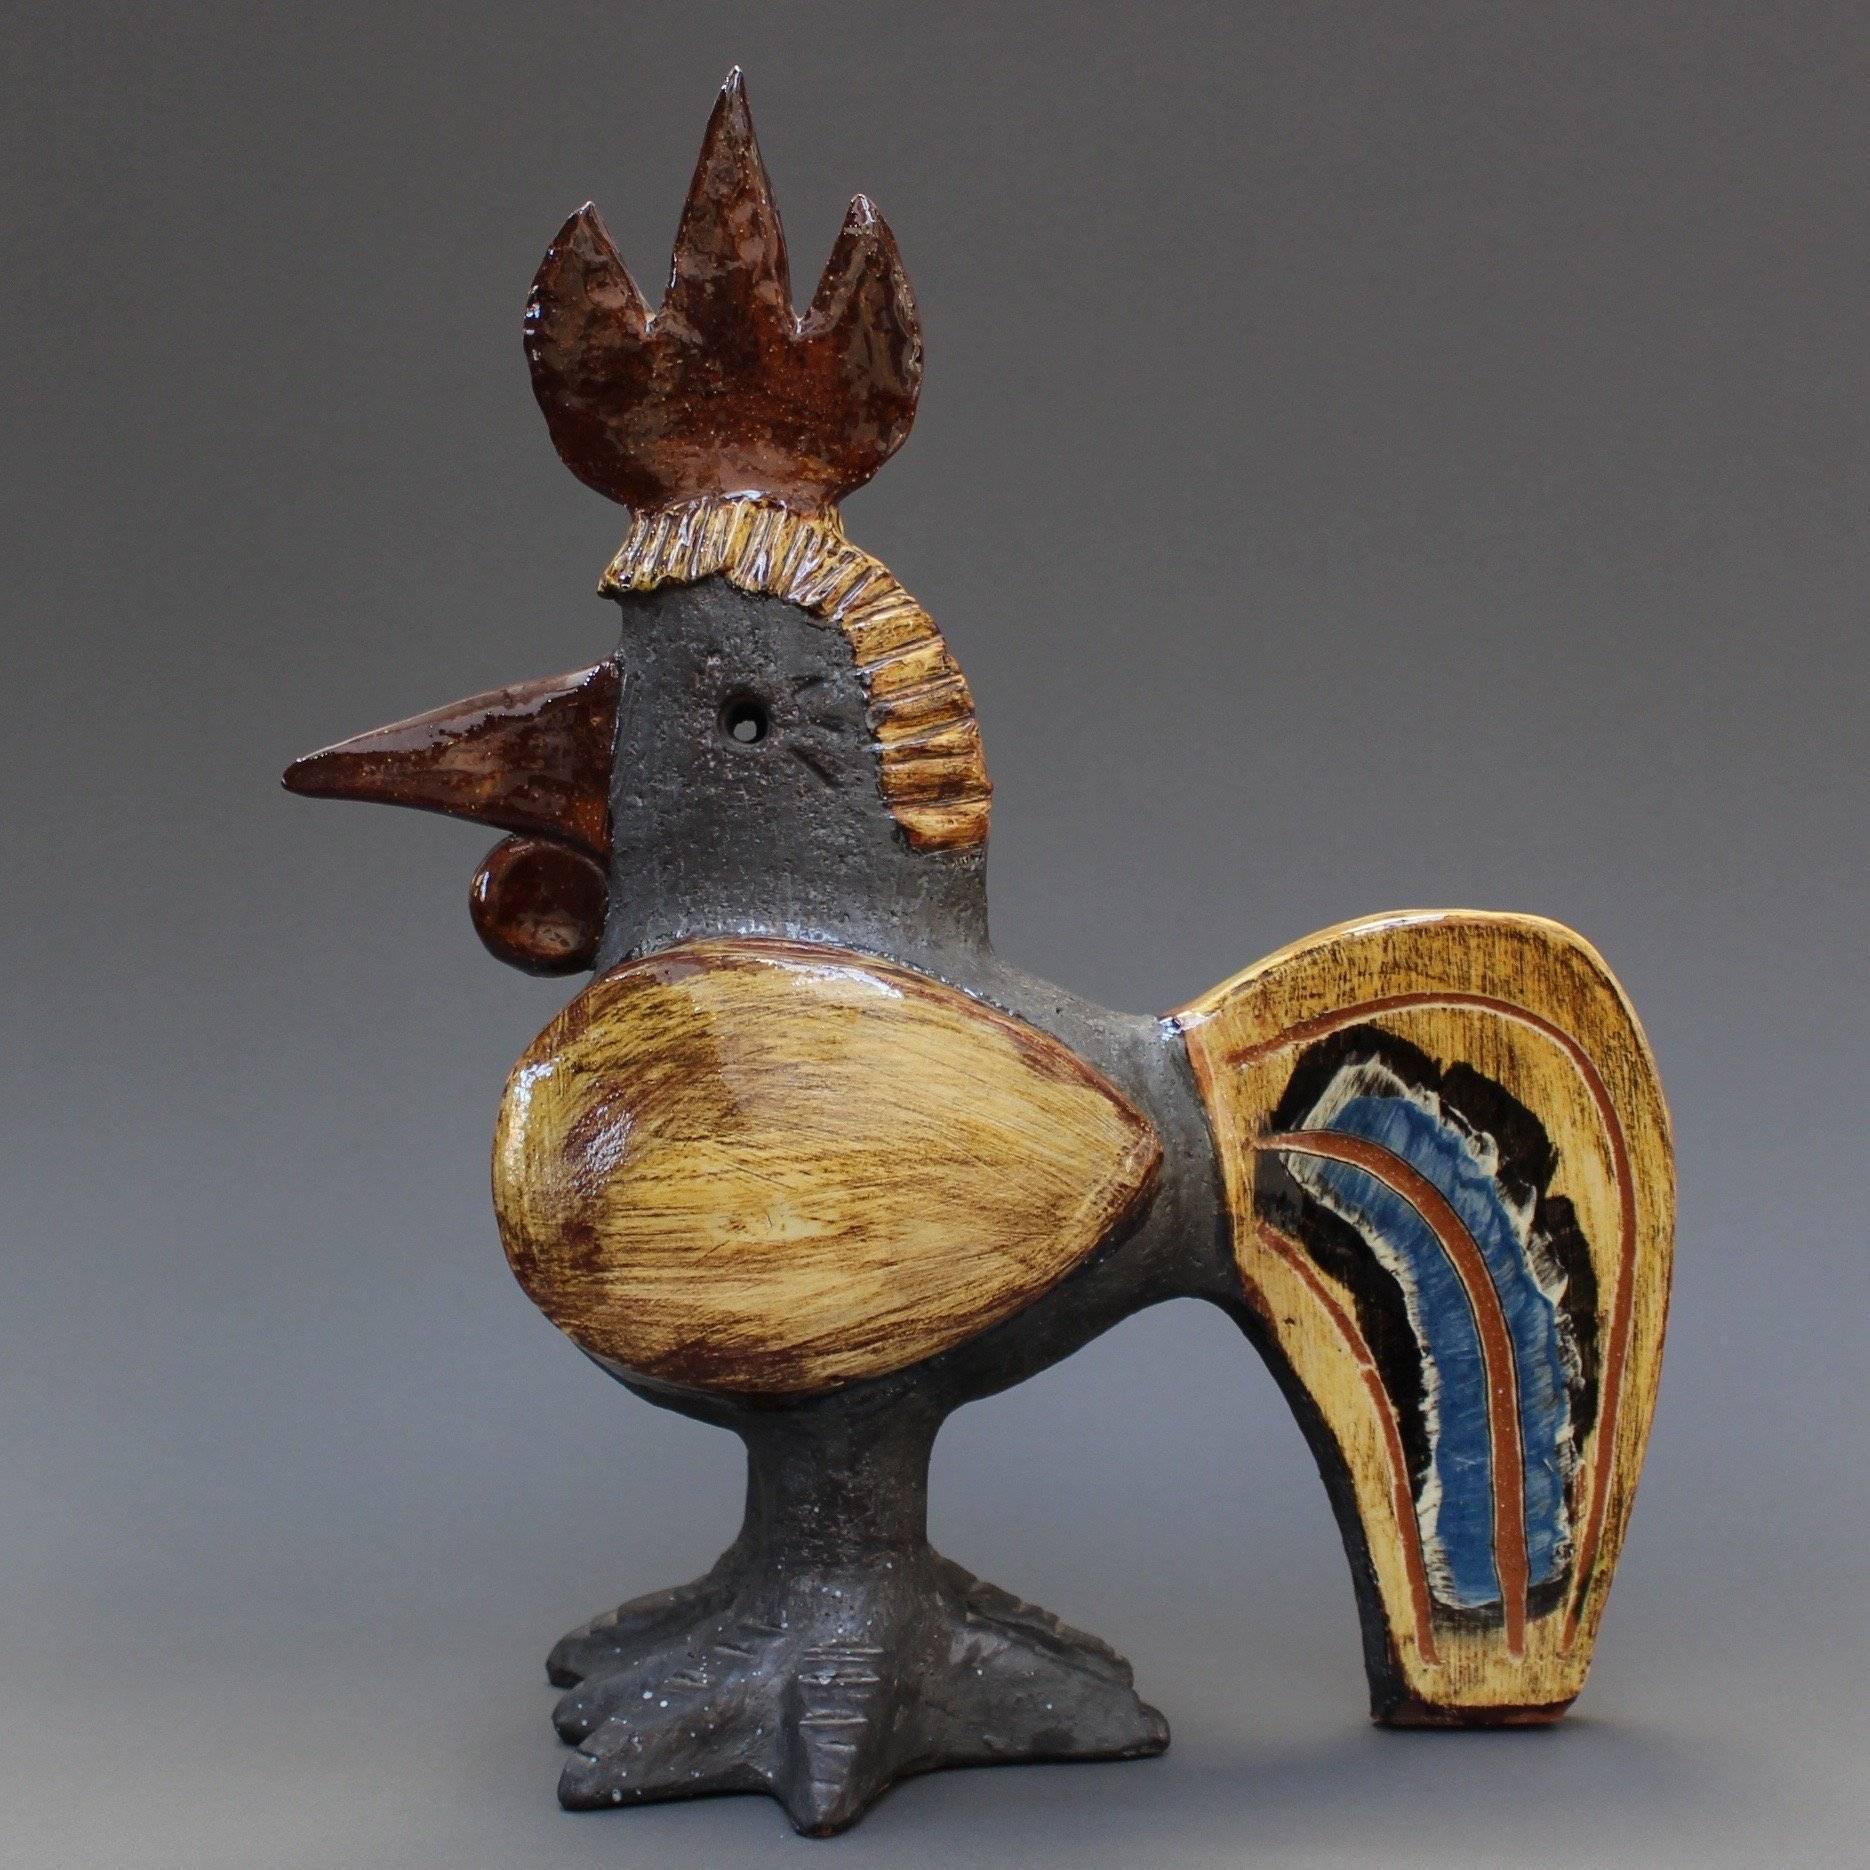 Ceramic French Rooster(s) by Dominique Pouchain, (circa 1990s). This whimsical coq is pure joy to look at and to display. The artist himself indicated he had so much fun in its creation. The body is flat black with etched markings; the wings, tail,